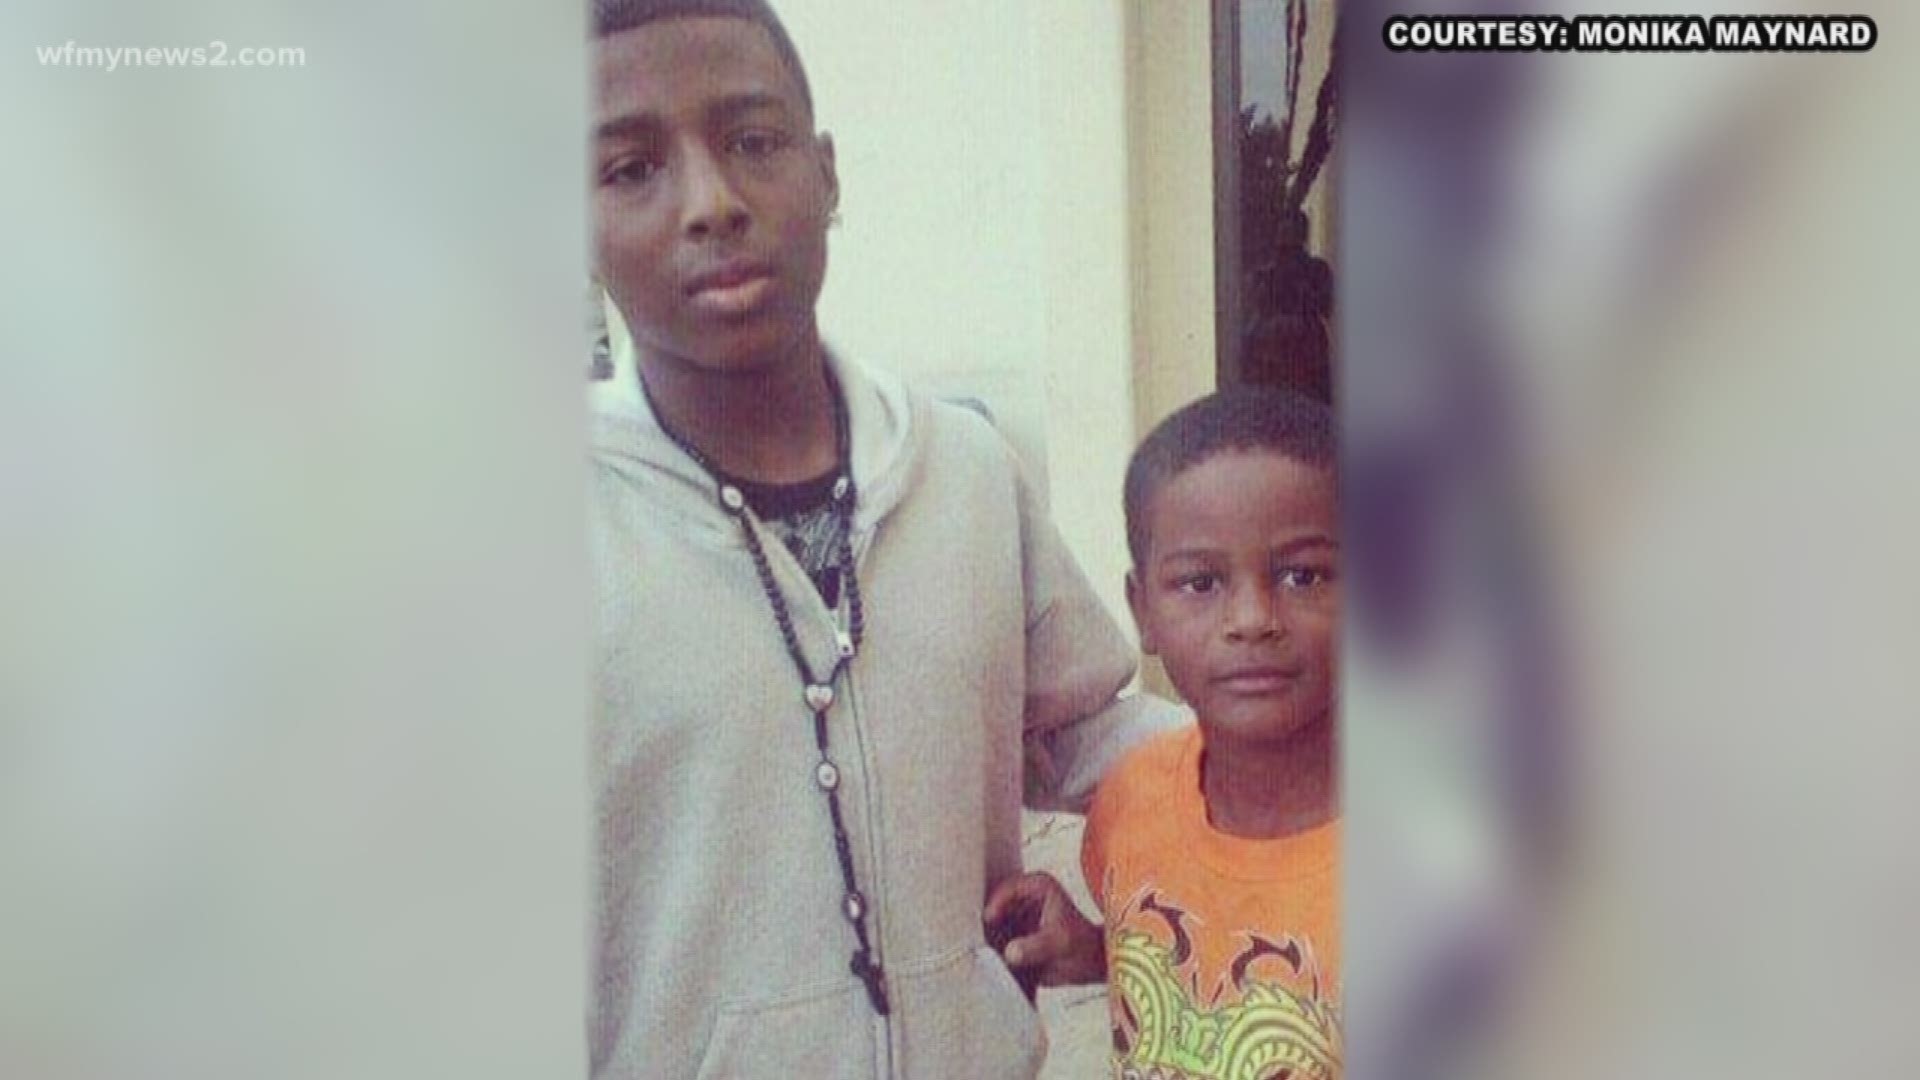 A mother is grieving after her two sons died in a car crash over the weekend.